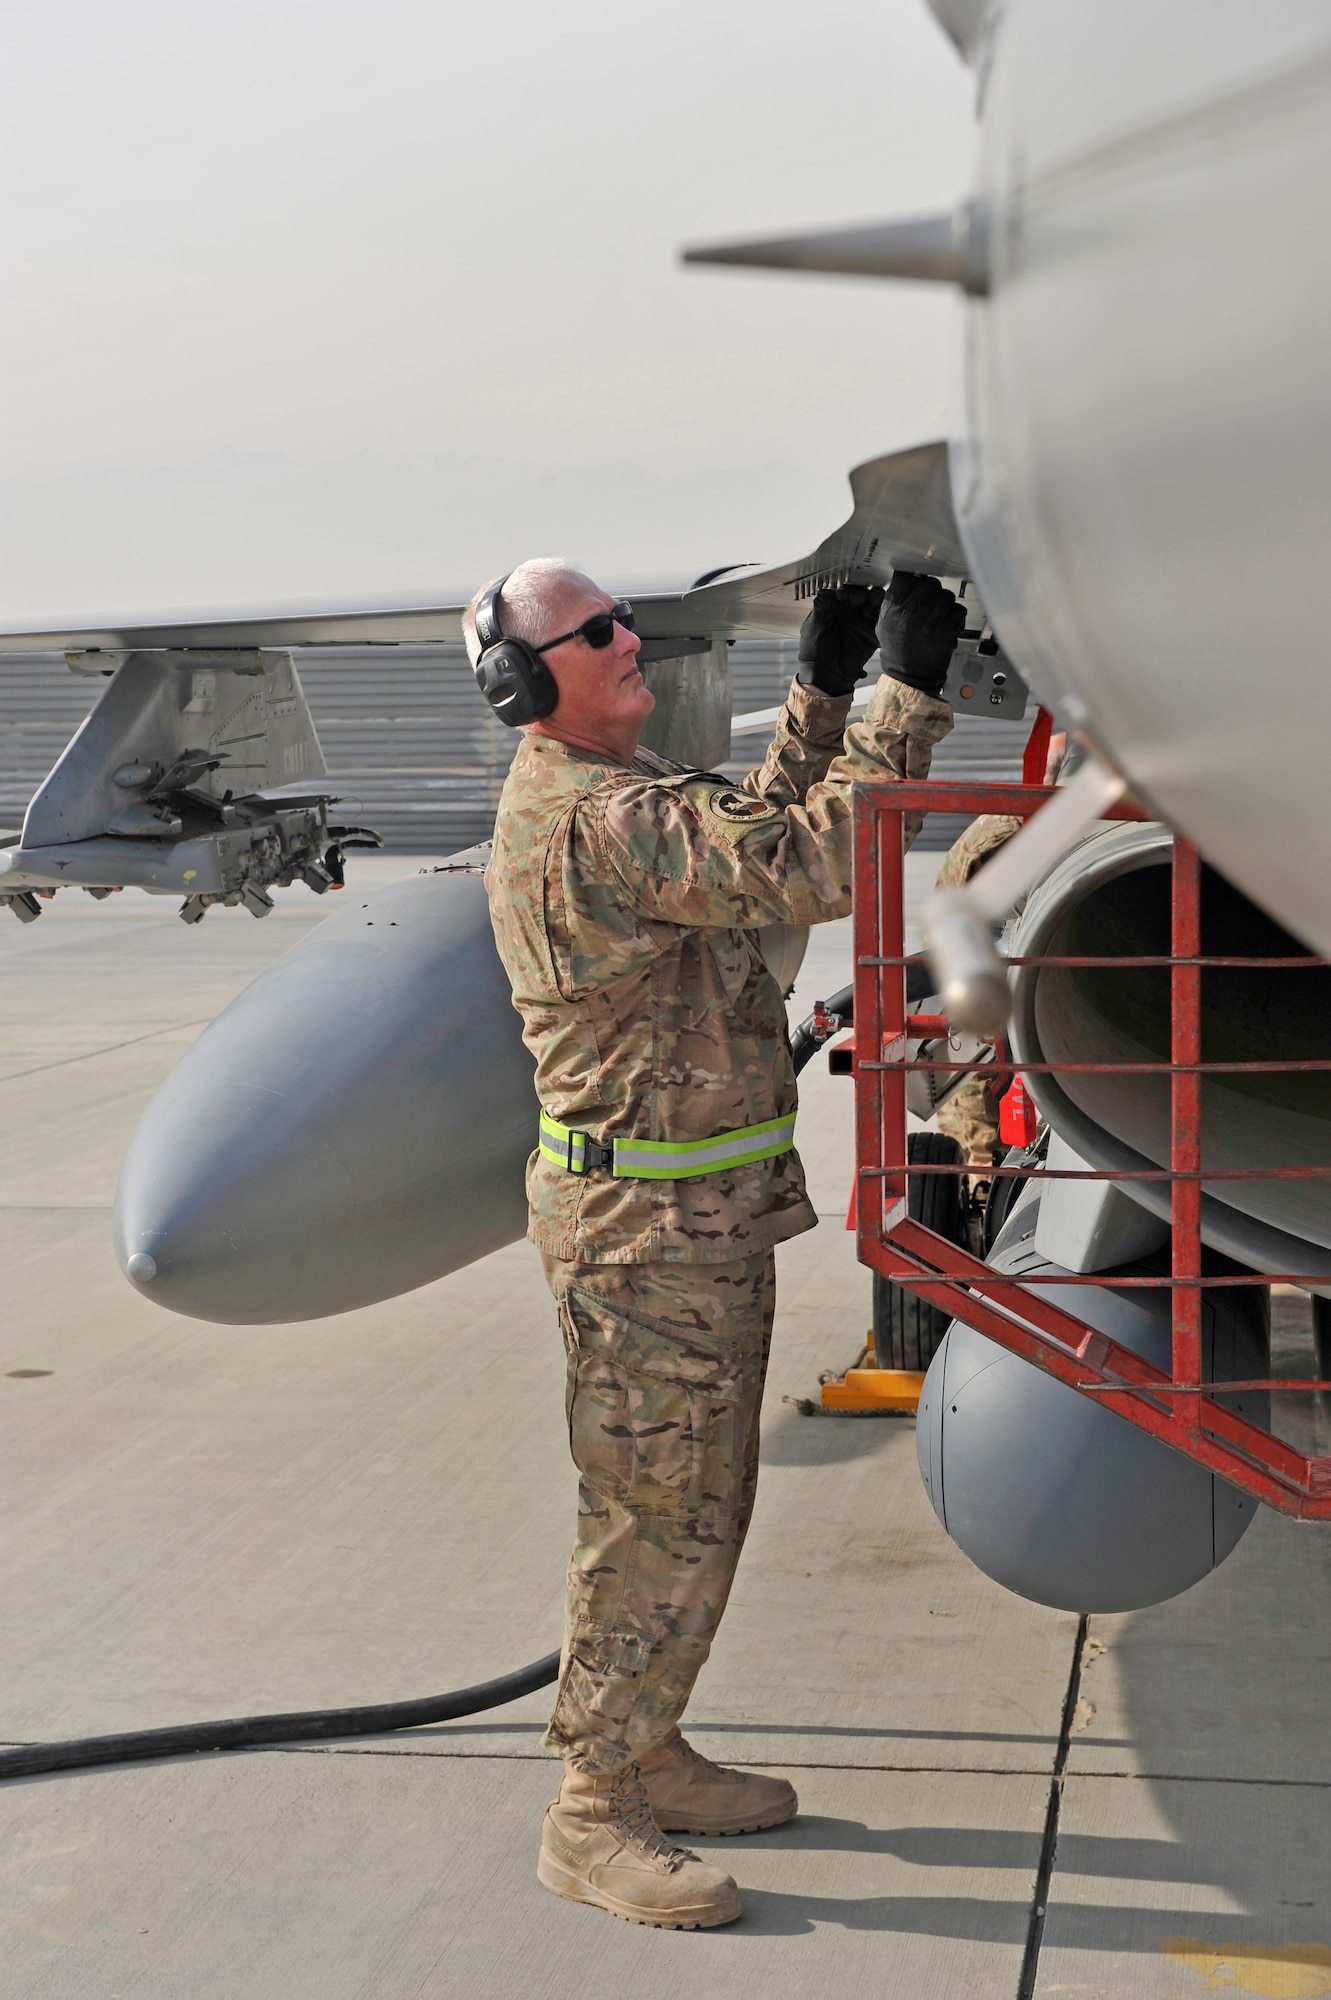 U.S. Air Force Senior Master Sgt. Paul Jordan reattaches a panel after performing an inspection on an F-16 at Bagram Airfield, Afghanistan, Jan. 20, 2014. Jordan is deployed out of Carswell Joint Reserve Base in Fort Worth, Texas to Bagram, and will be retiring this year after 42 years of military service. (U.S. Air Force photo by Senior Master Sgt. Gary J. Rihn/Released)